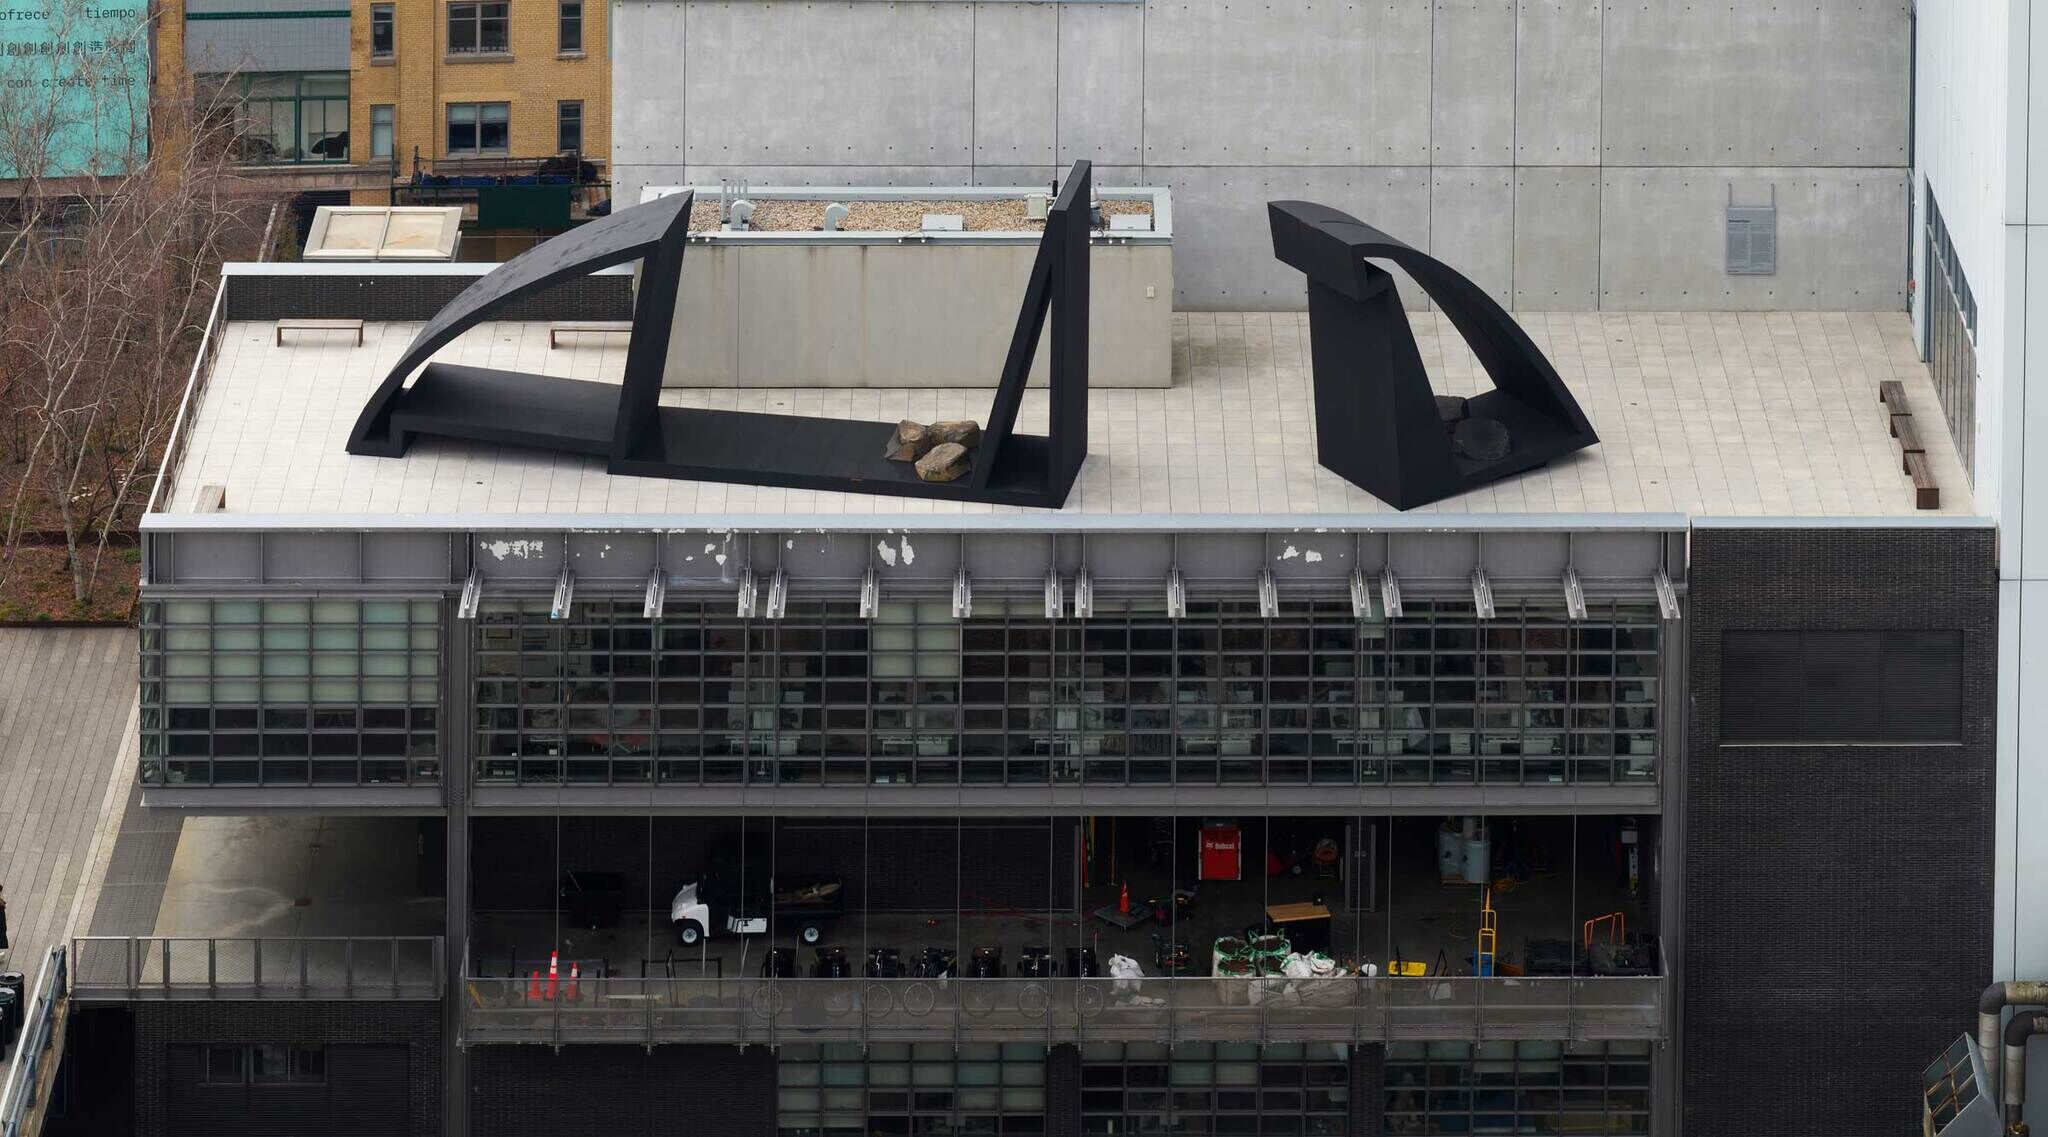 Aerial view of a building rooftop with two large, abstract black sculptures and a glimpse into the interior floors below.